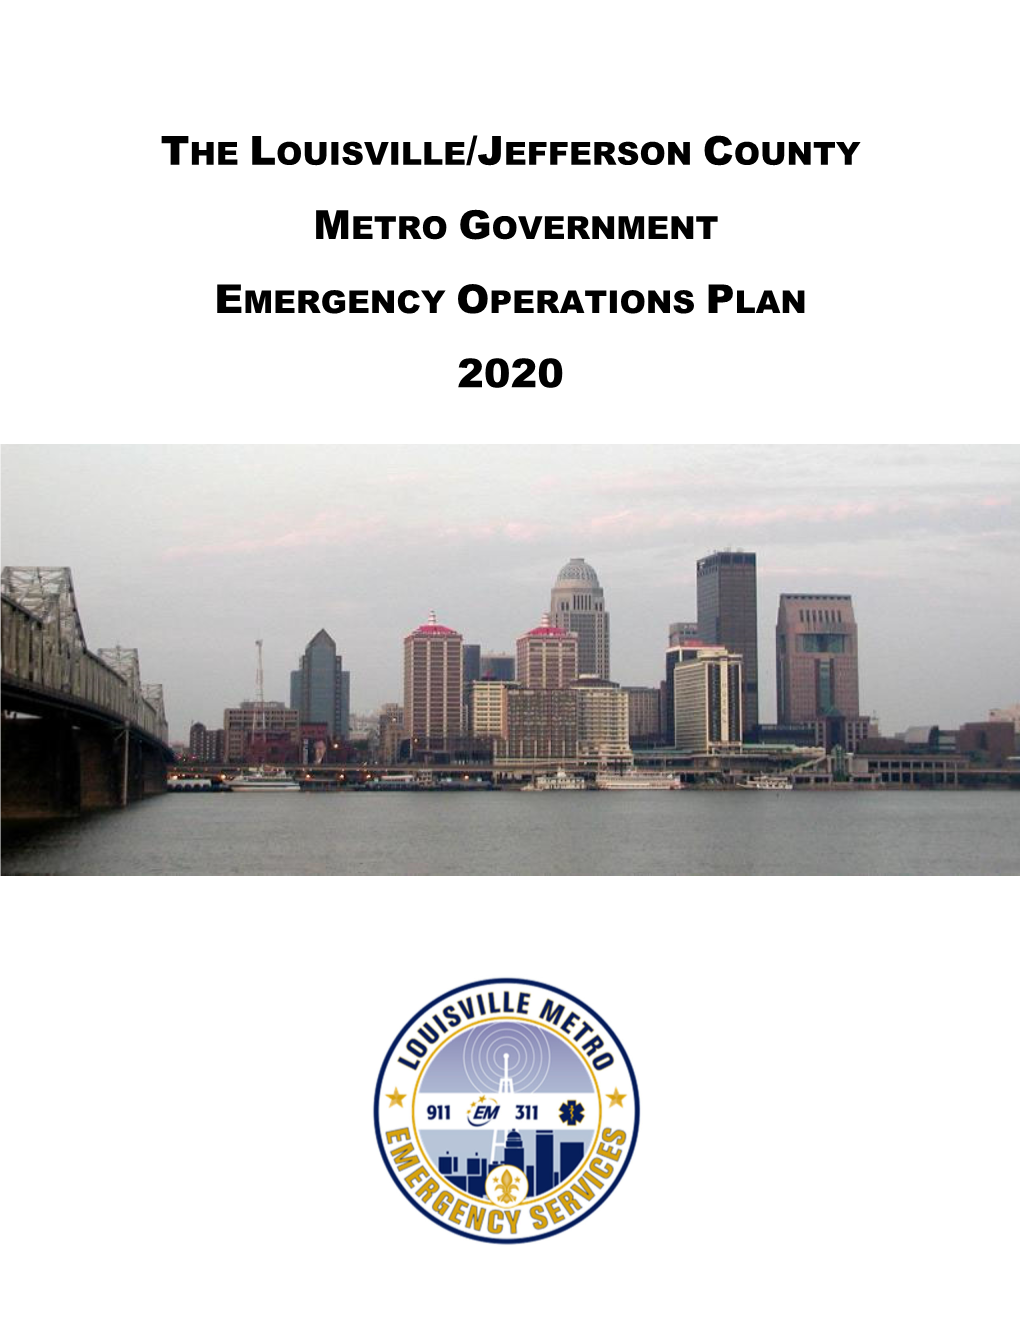 The Louisville/Jefferson County Metro Government Emergency Operations